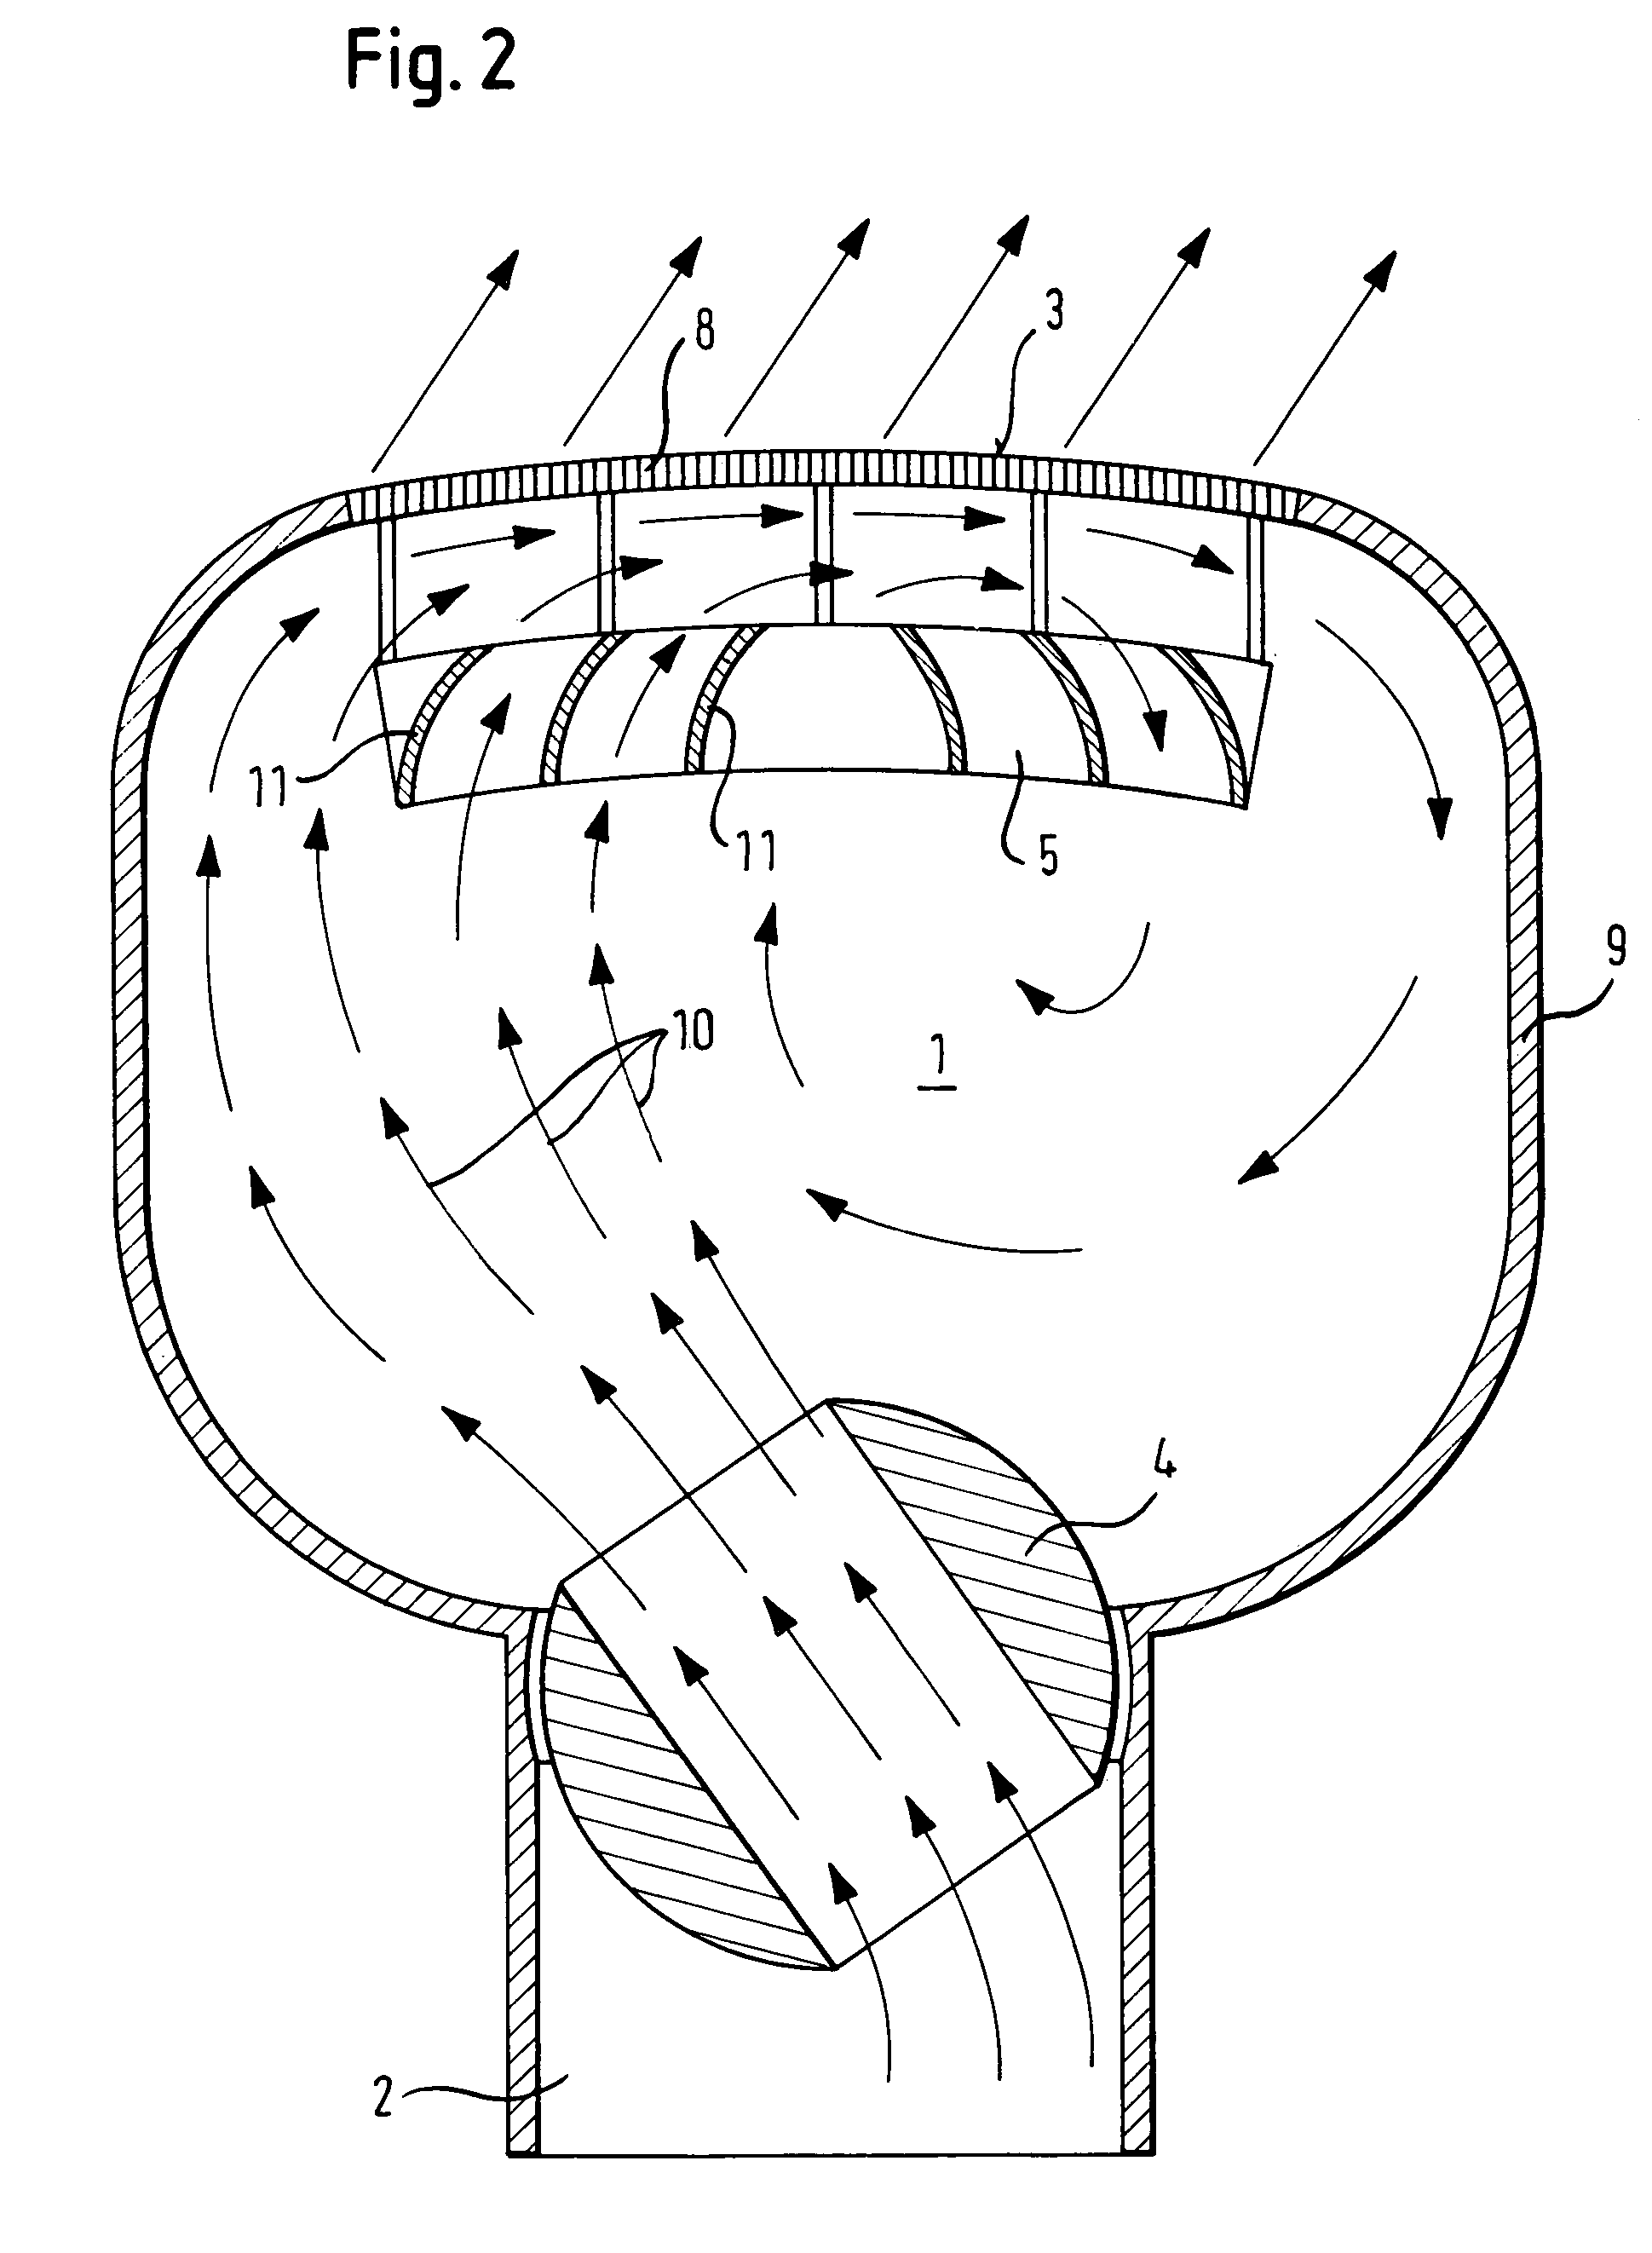 Air vent for a ventilation system